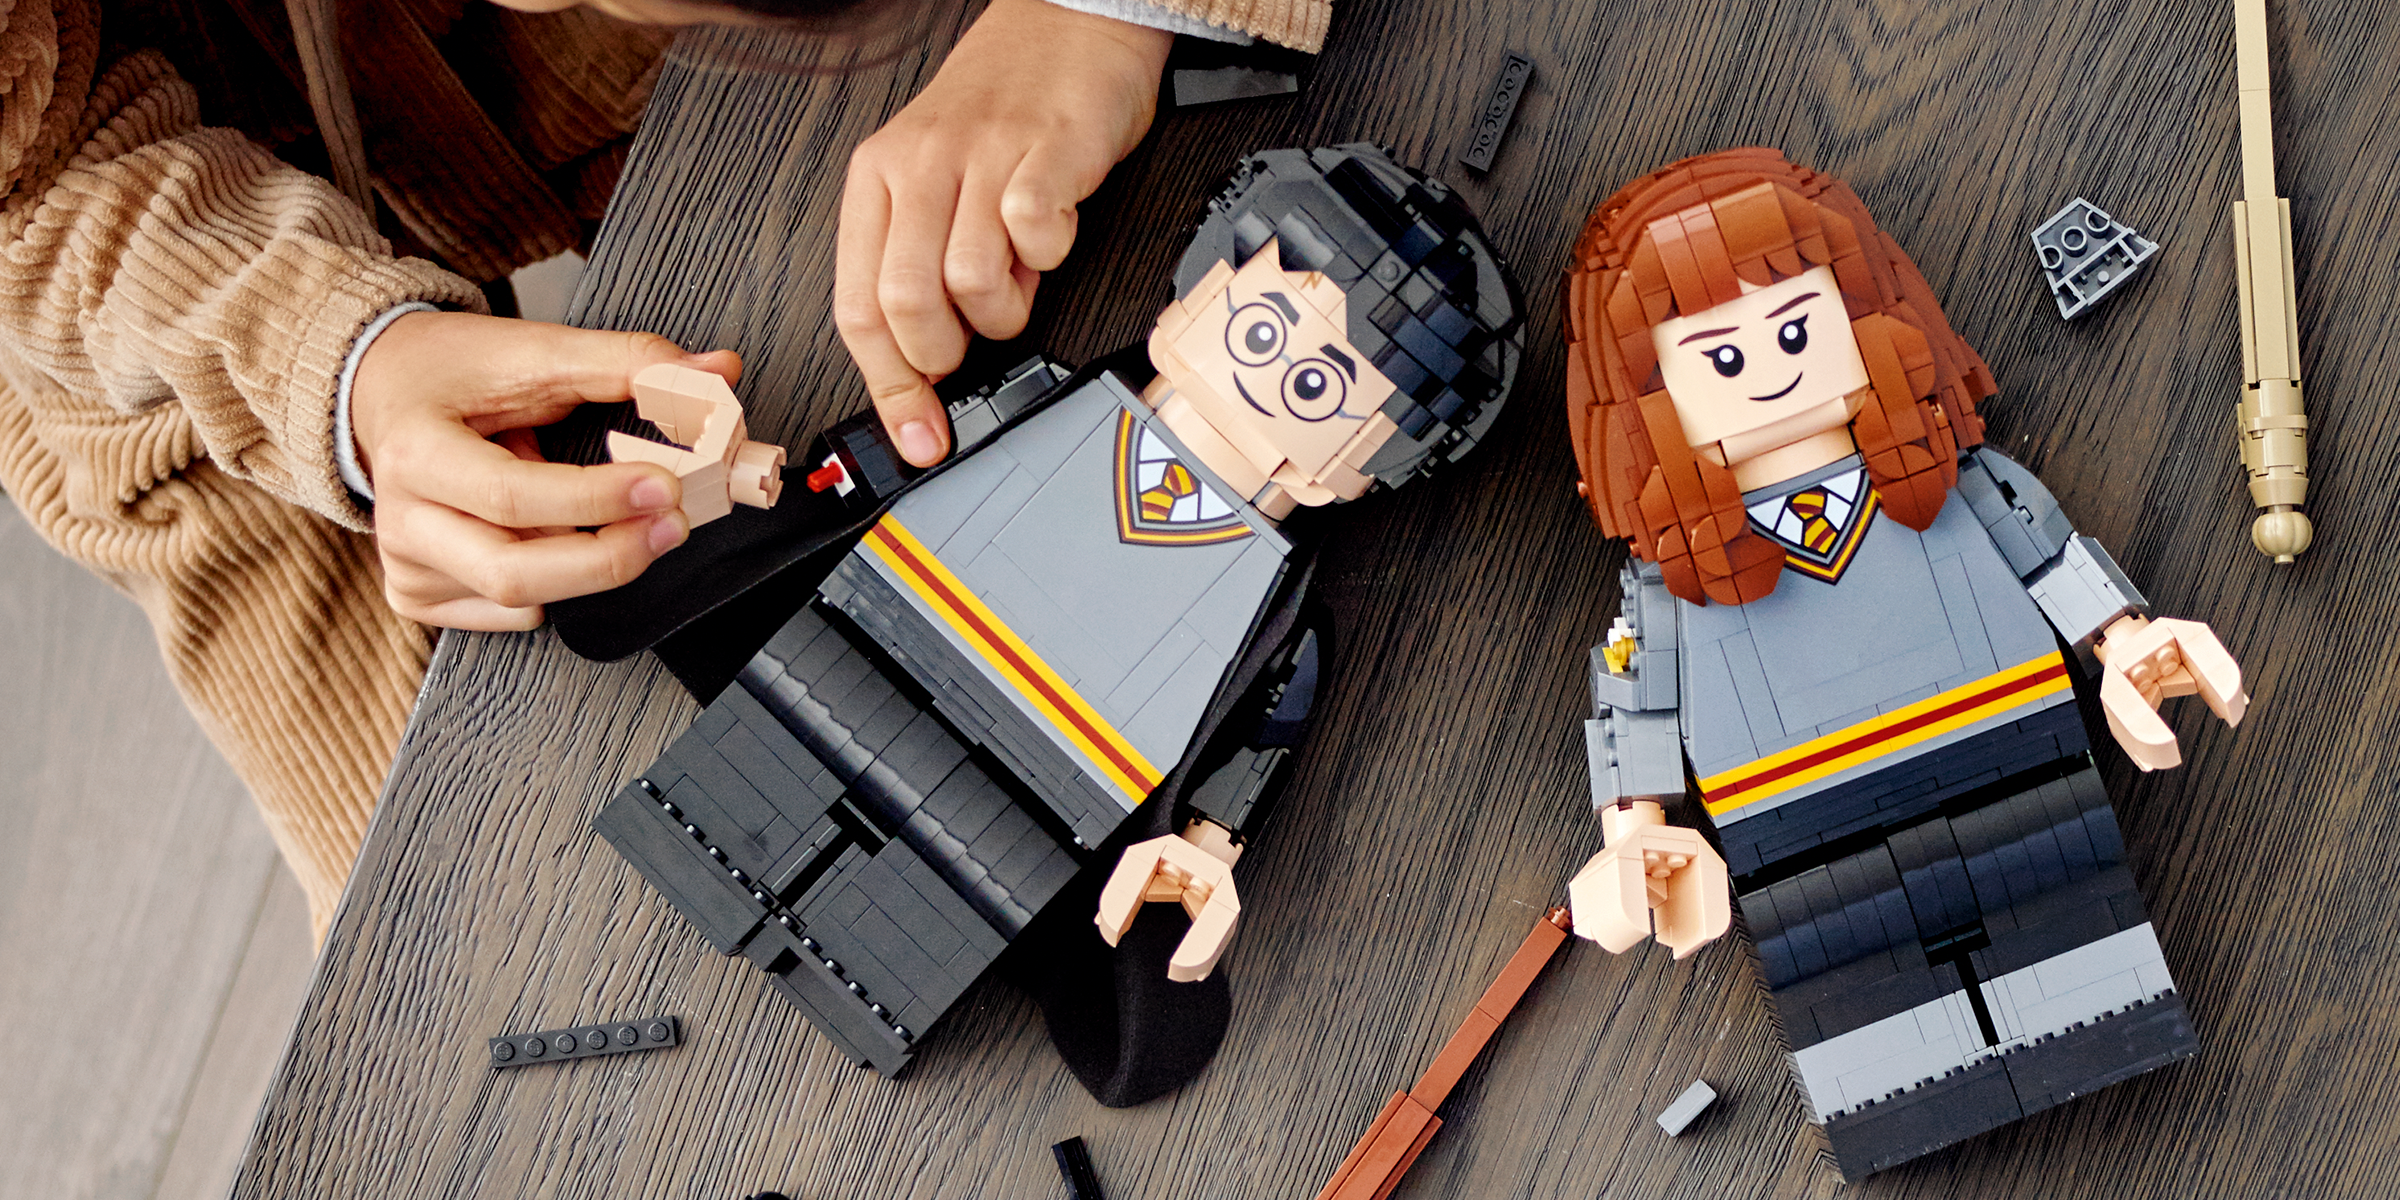 Harry Potter and Hermione Granger as LEGOs